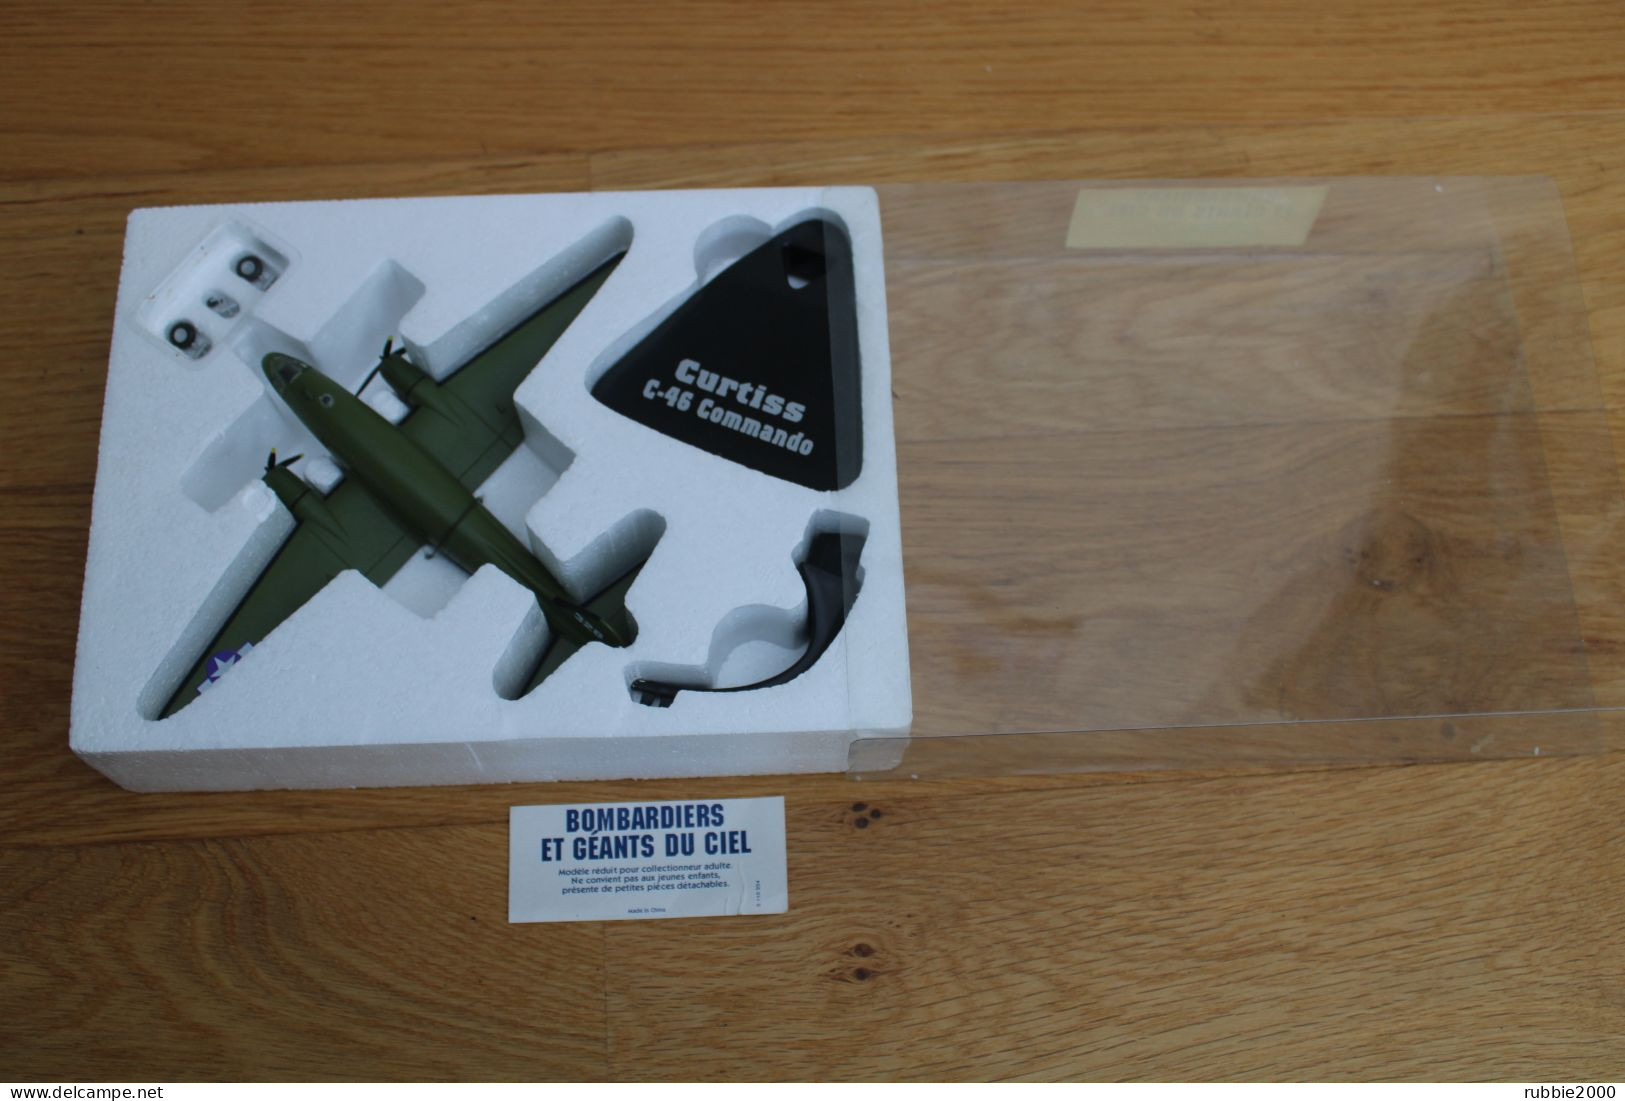 MAQUETTE AVION CURTISS C 46 COMMANDO US AIR FORCE 1939 1945 WWII SERIE BOMBARDIERS GEANTS DU CIEL AVIATION - Airplanes